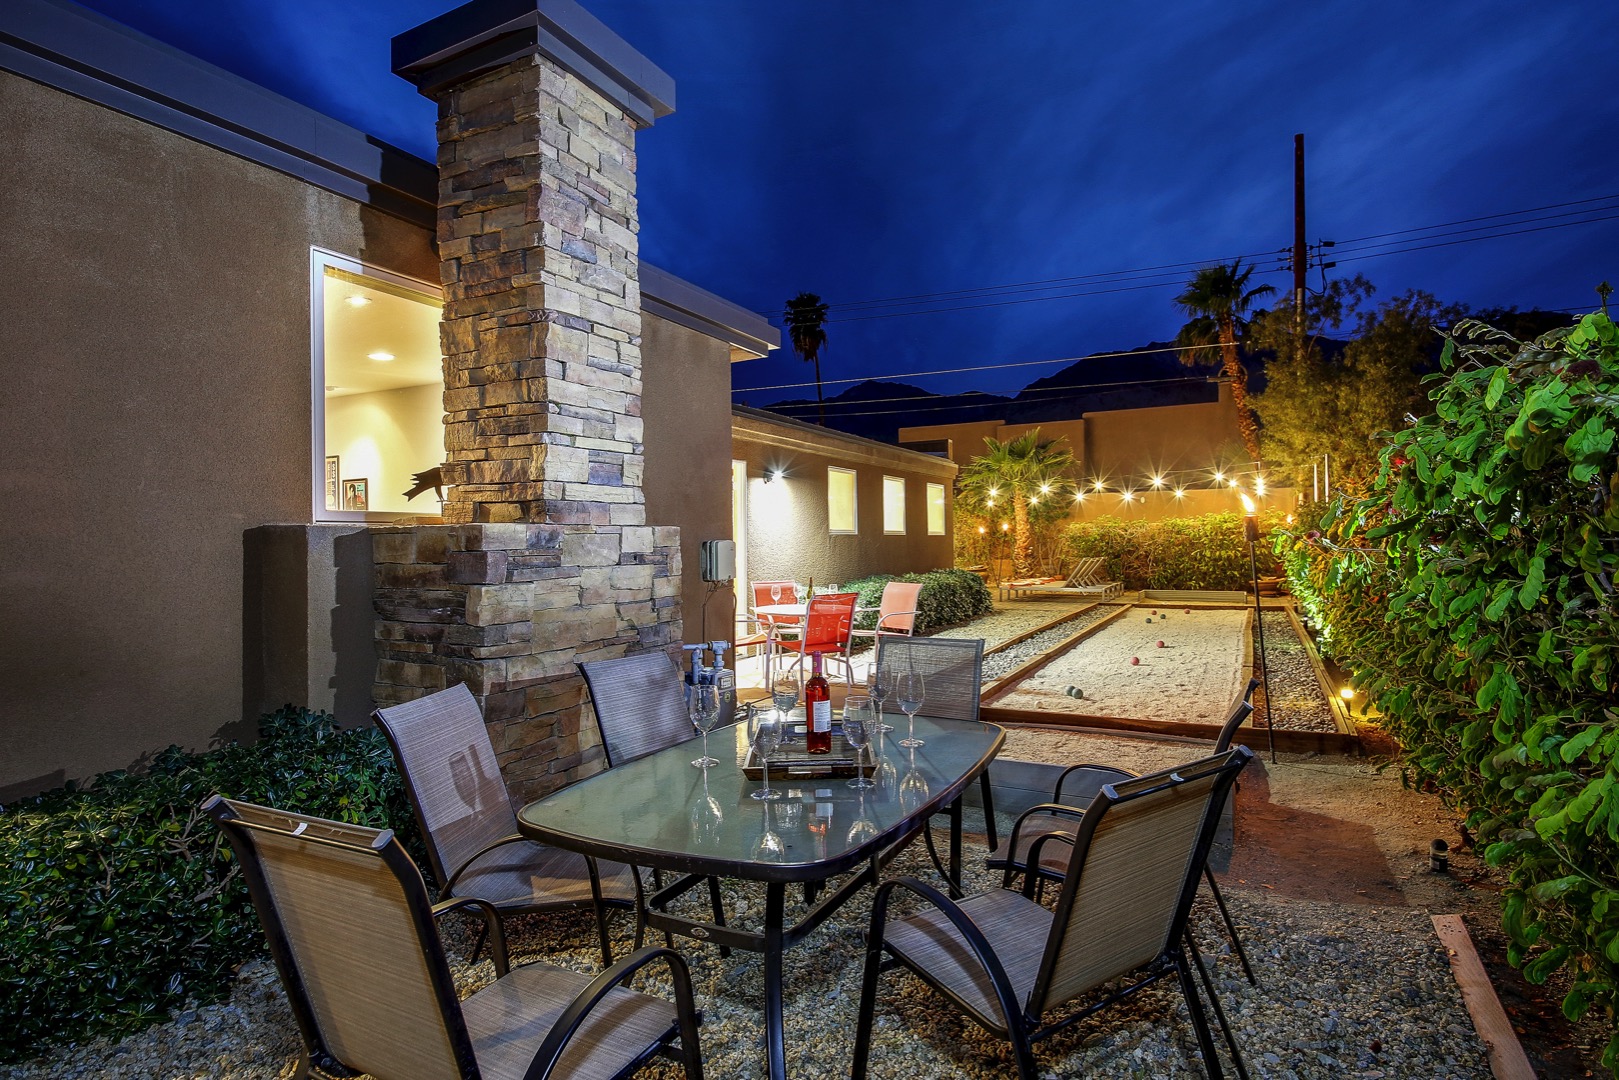 Conveniently located near the Bocce ball court, another patio dinning table for 6.